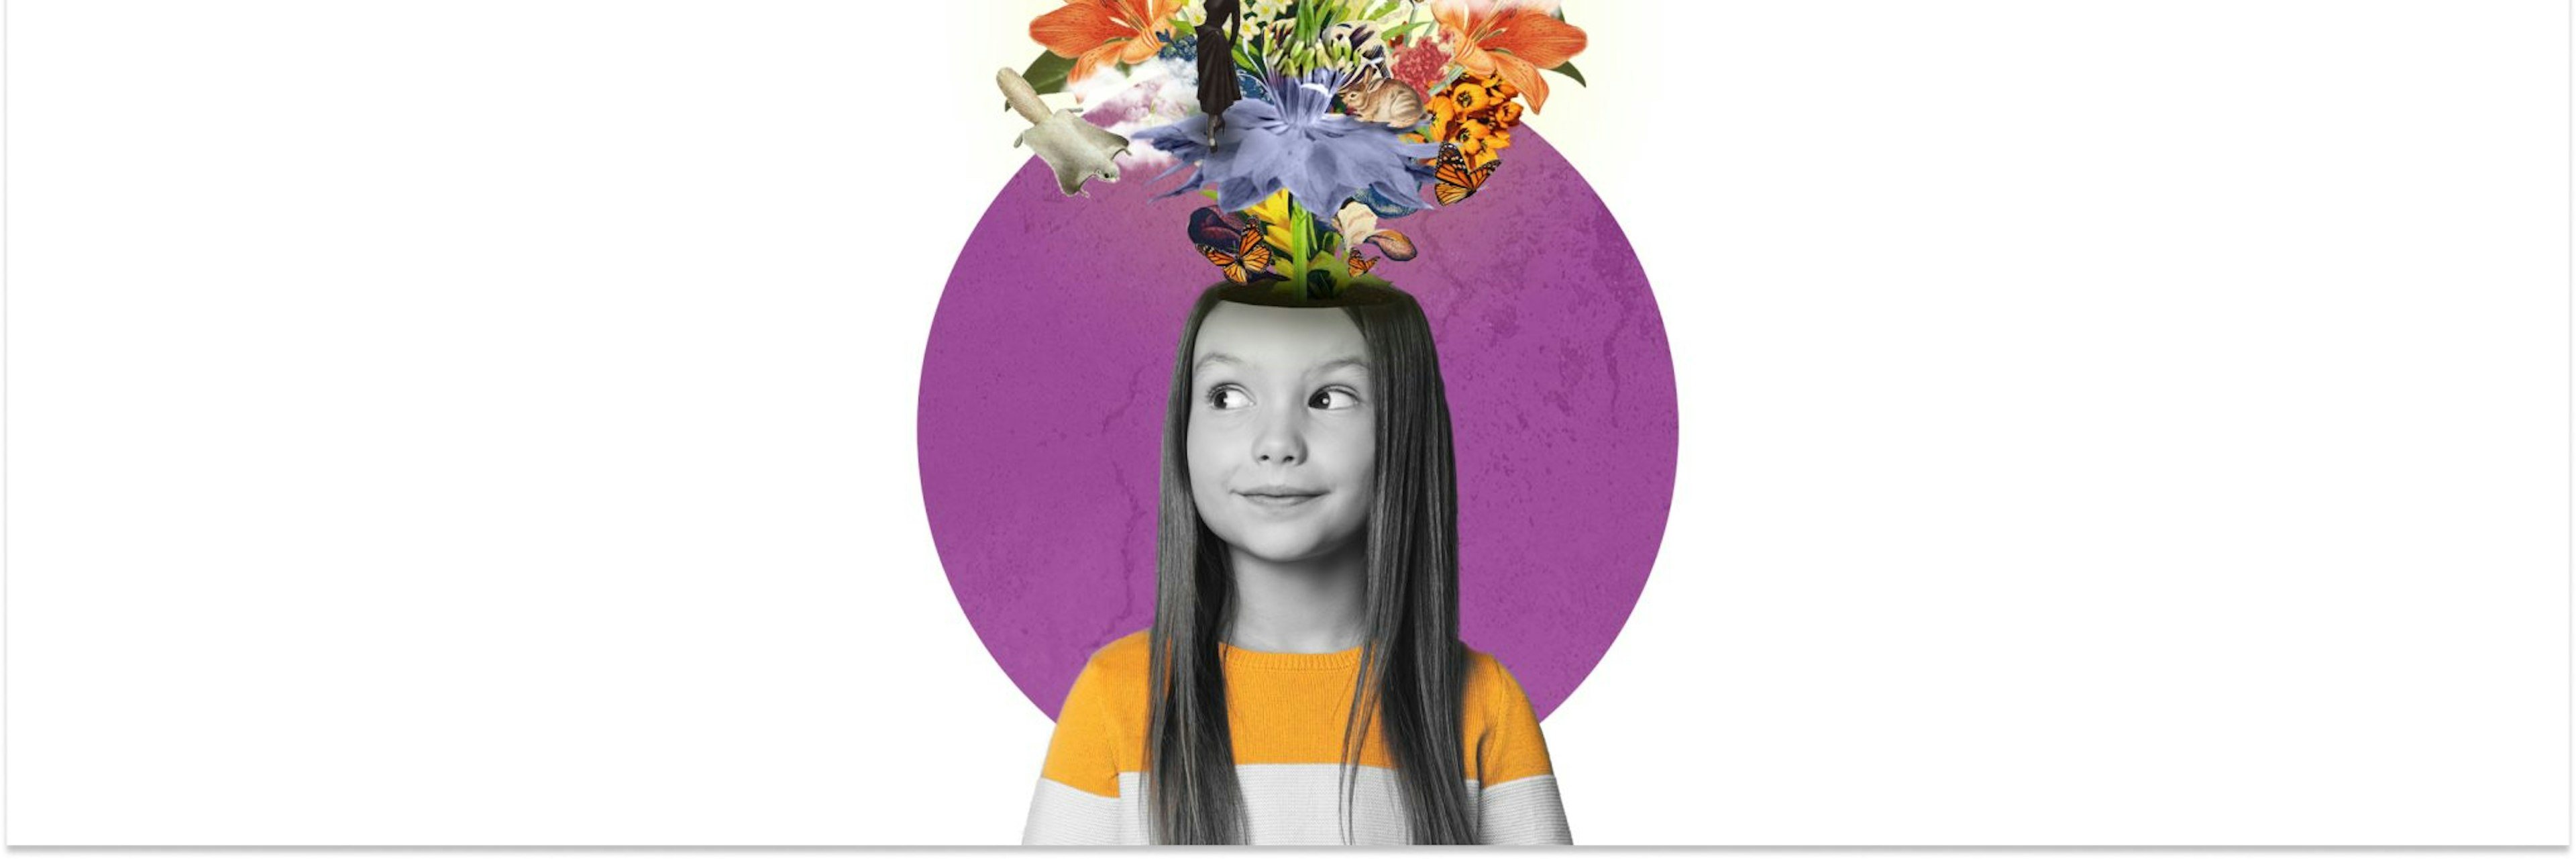 An image of a young girl with flowers and birds emerging from behind her head